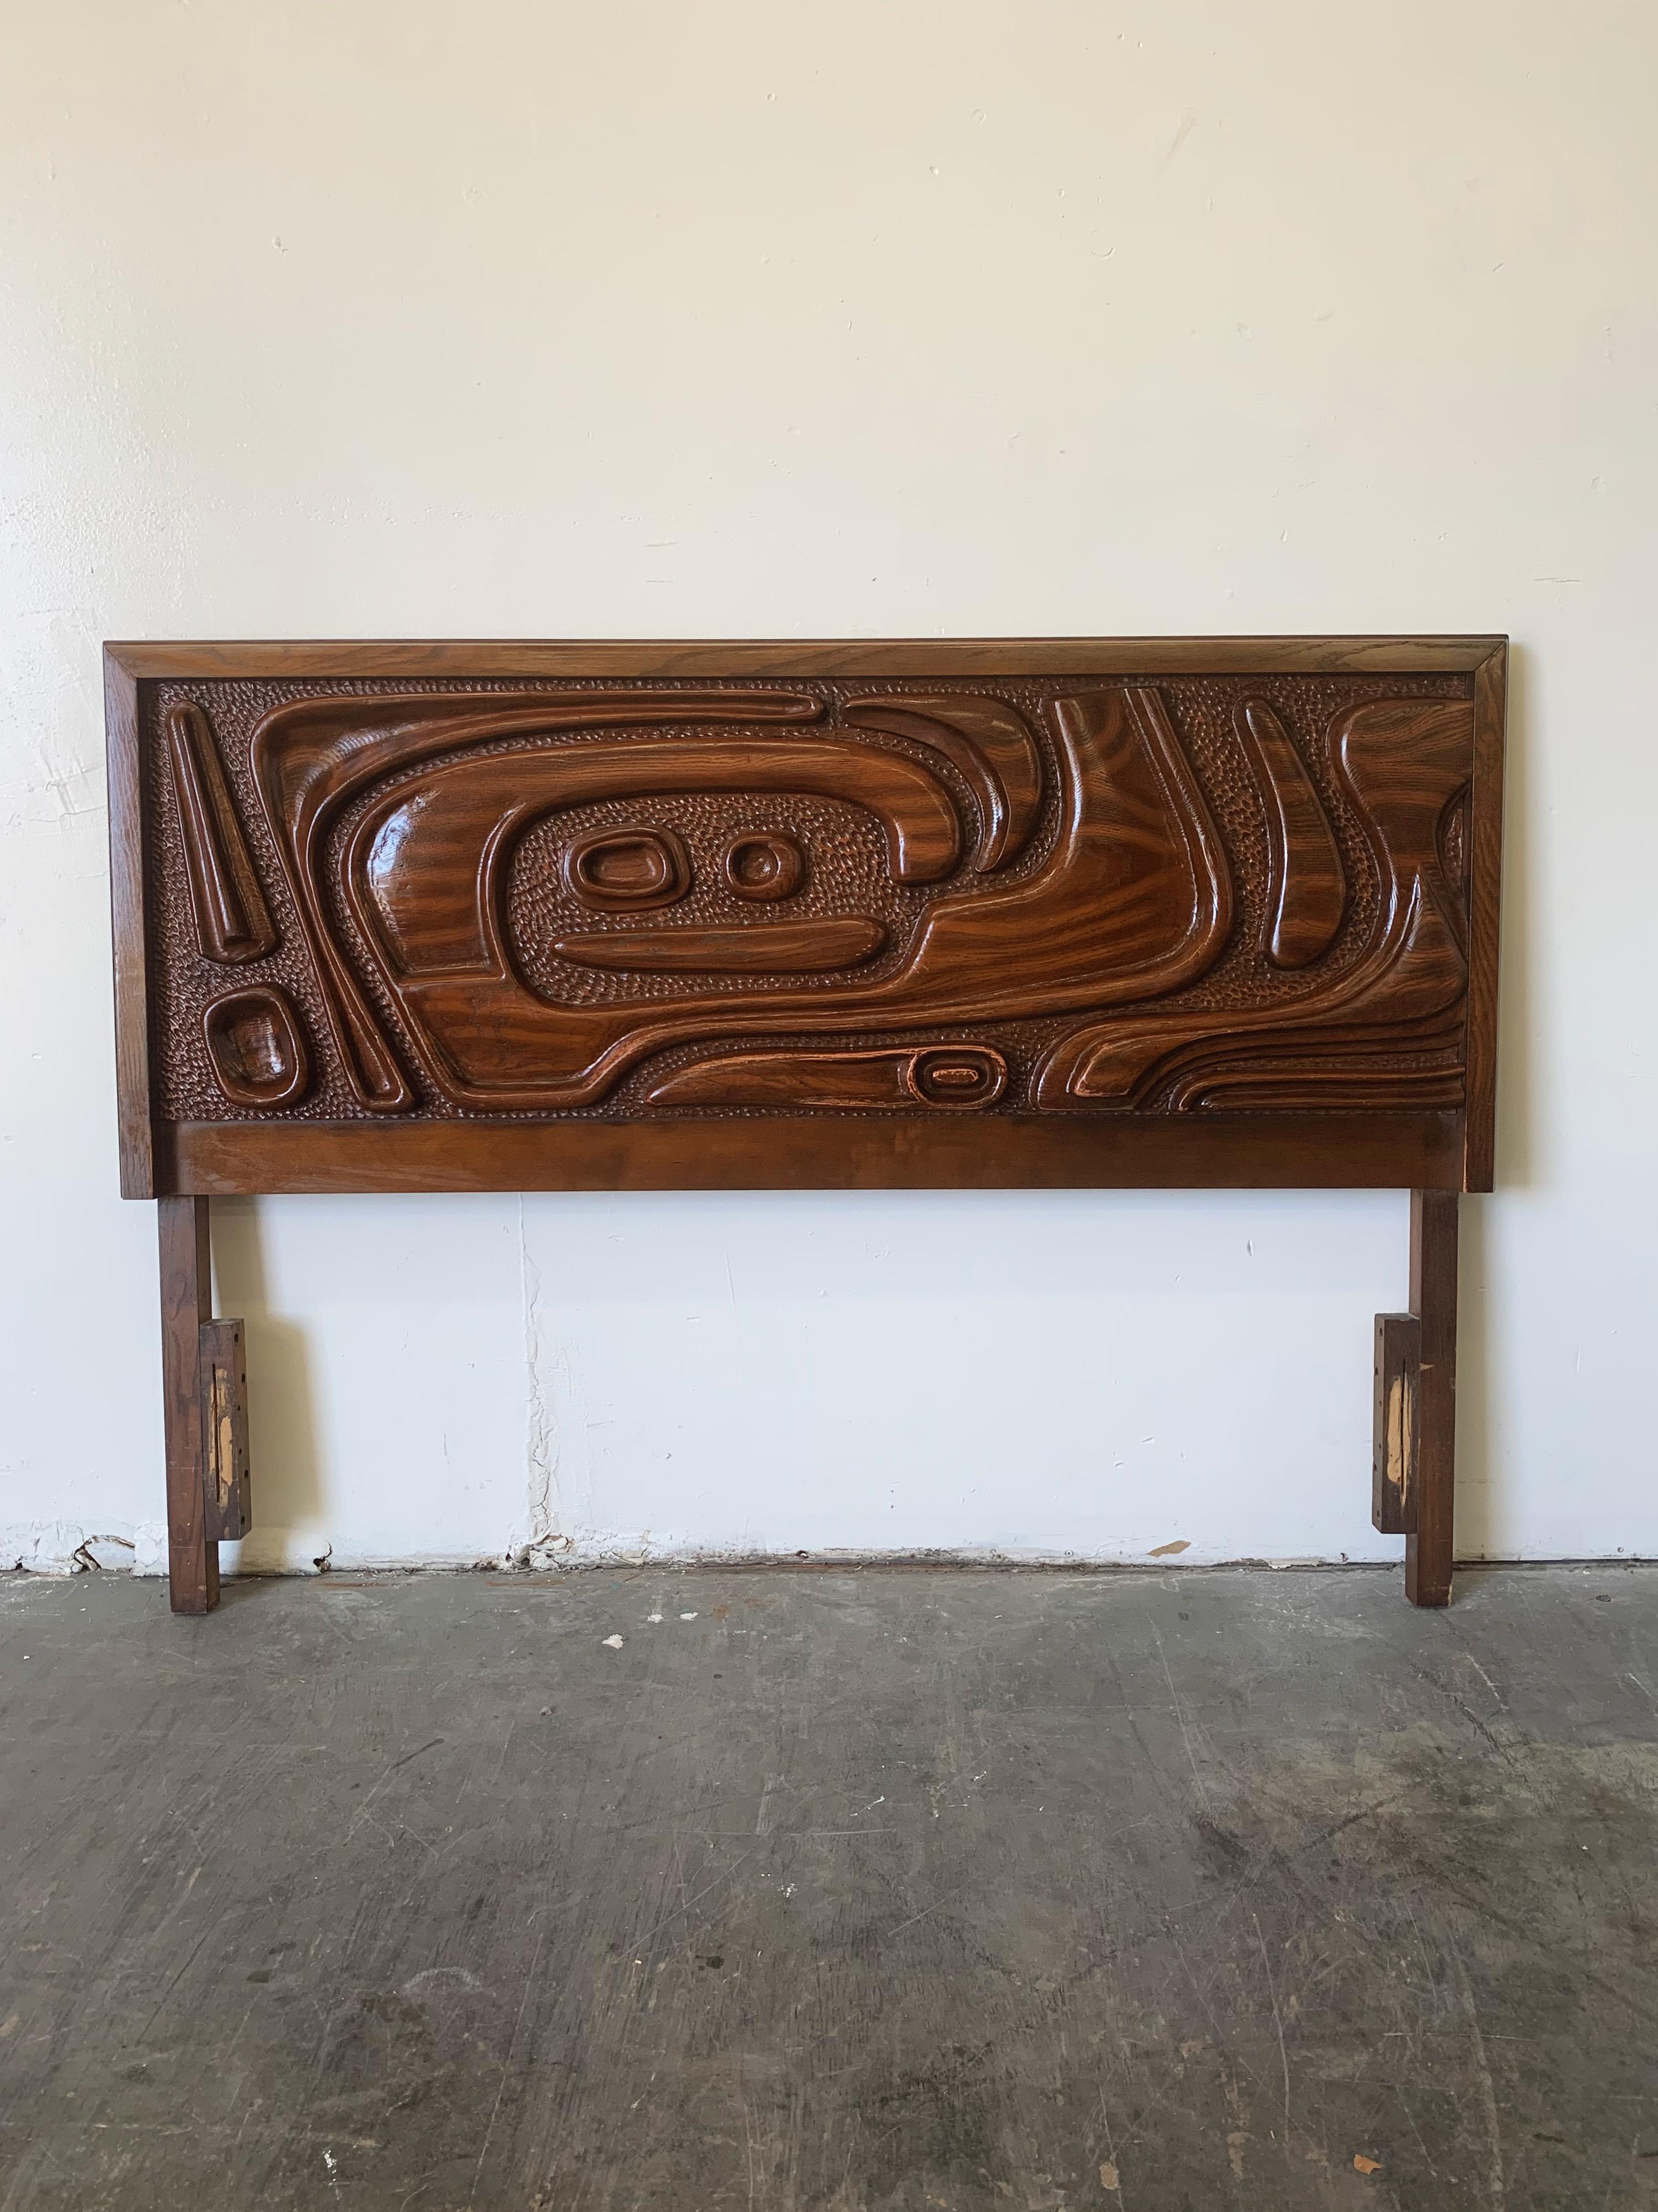 This fantastic lacquered sculpted walnut 'Oceanic' headboard by Pulaski Furniture Corporation, circa 1969 which perfectly encapsulates the California surf mentality of the 1960s and 1970s, making this piece a highly sought after design by Tiki